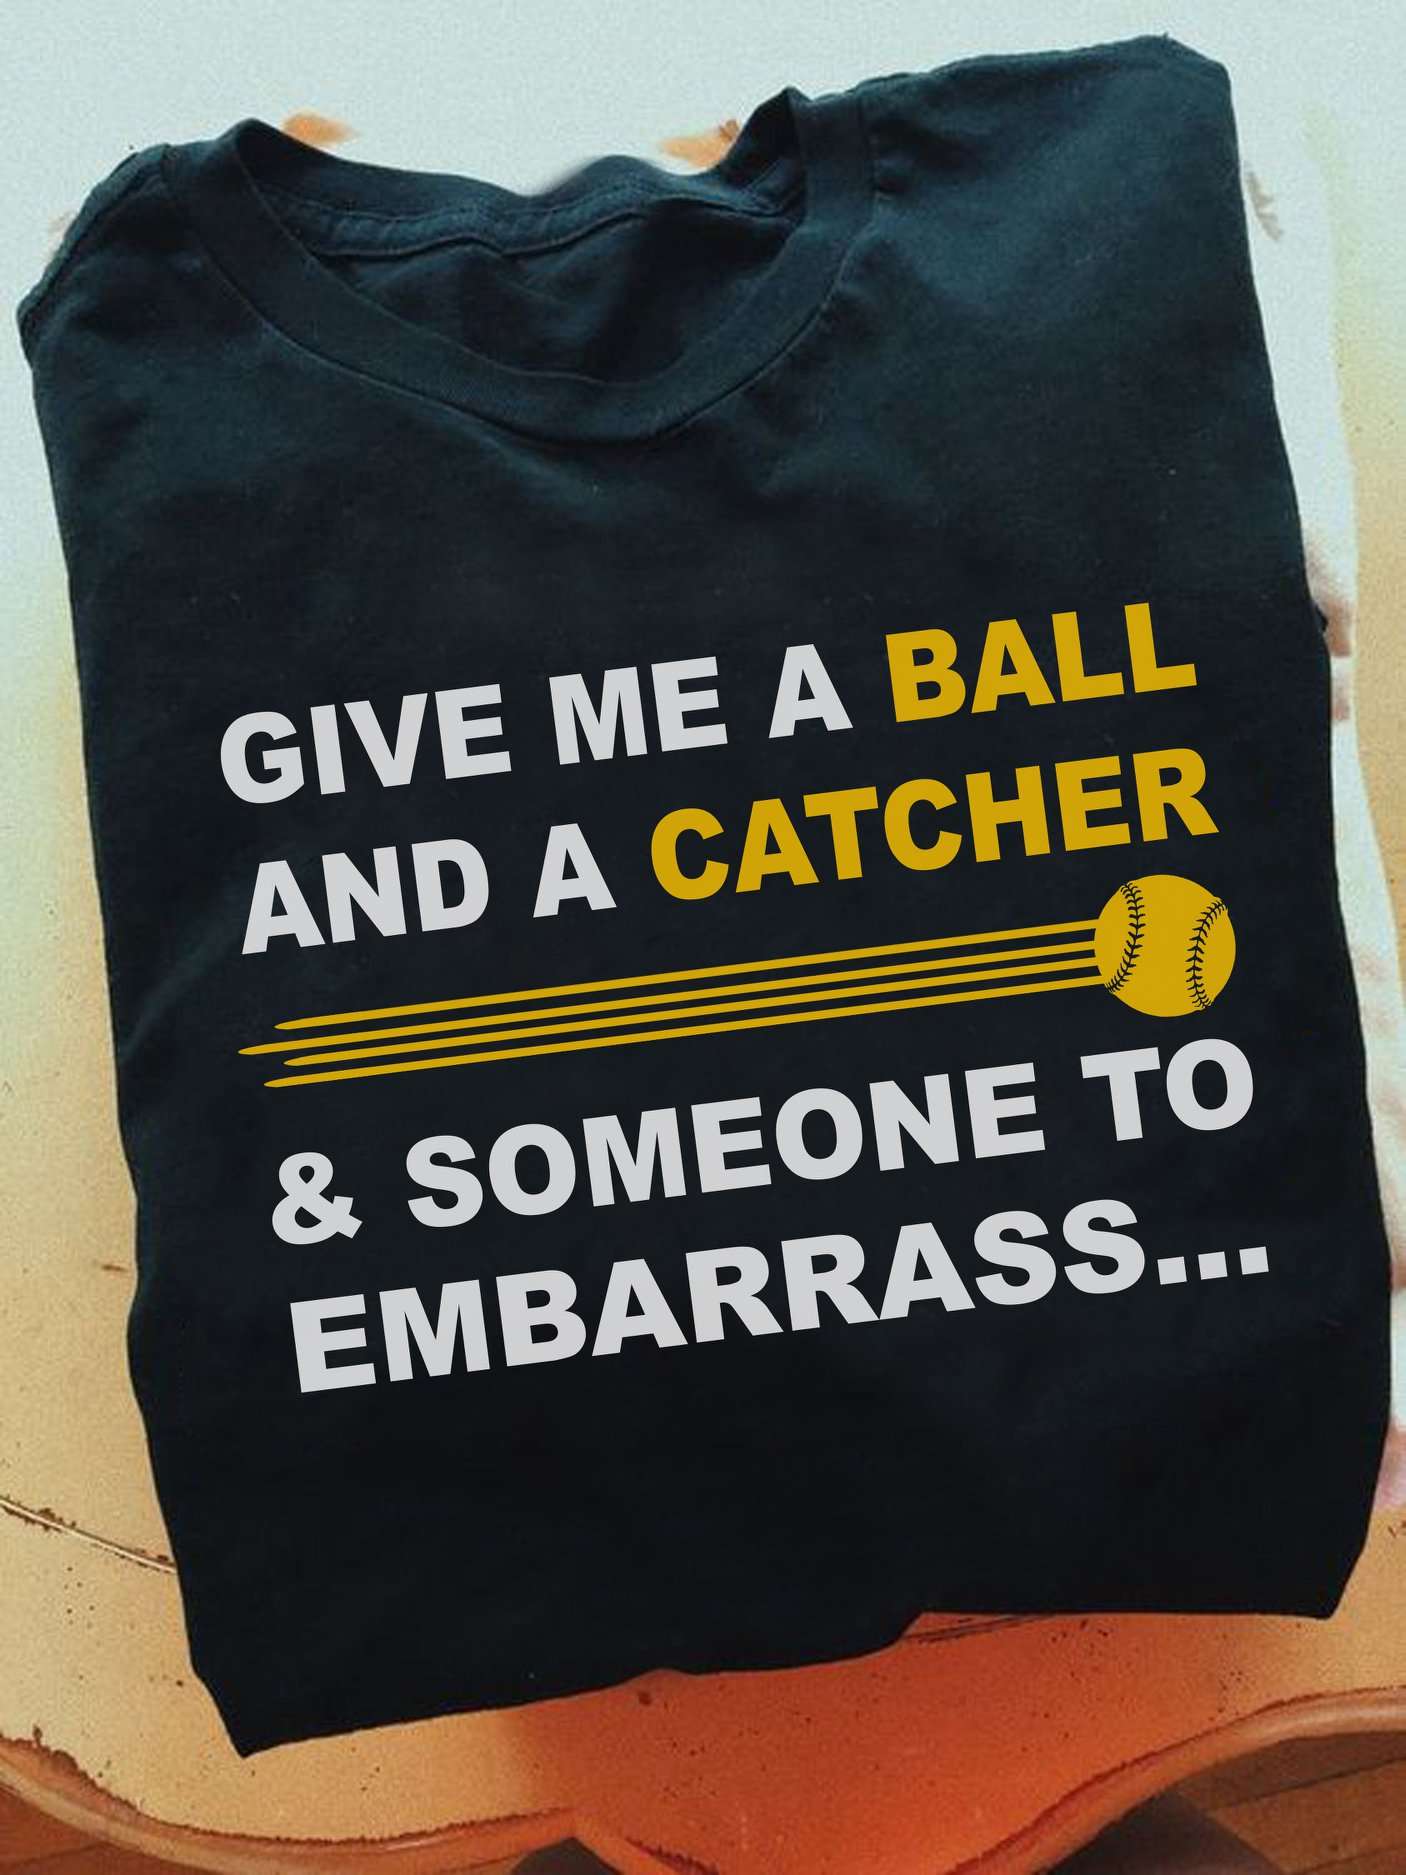 Give me a ball and a catcher and someone to embarrass - Baseball player